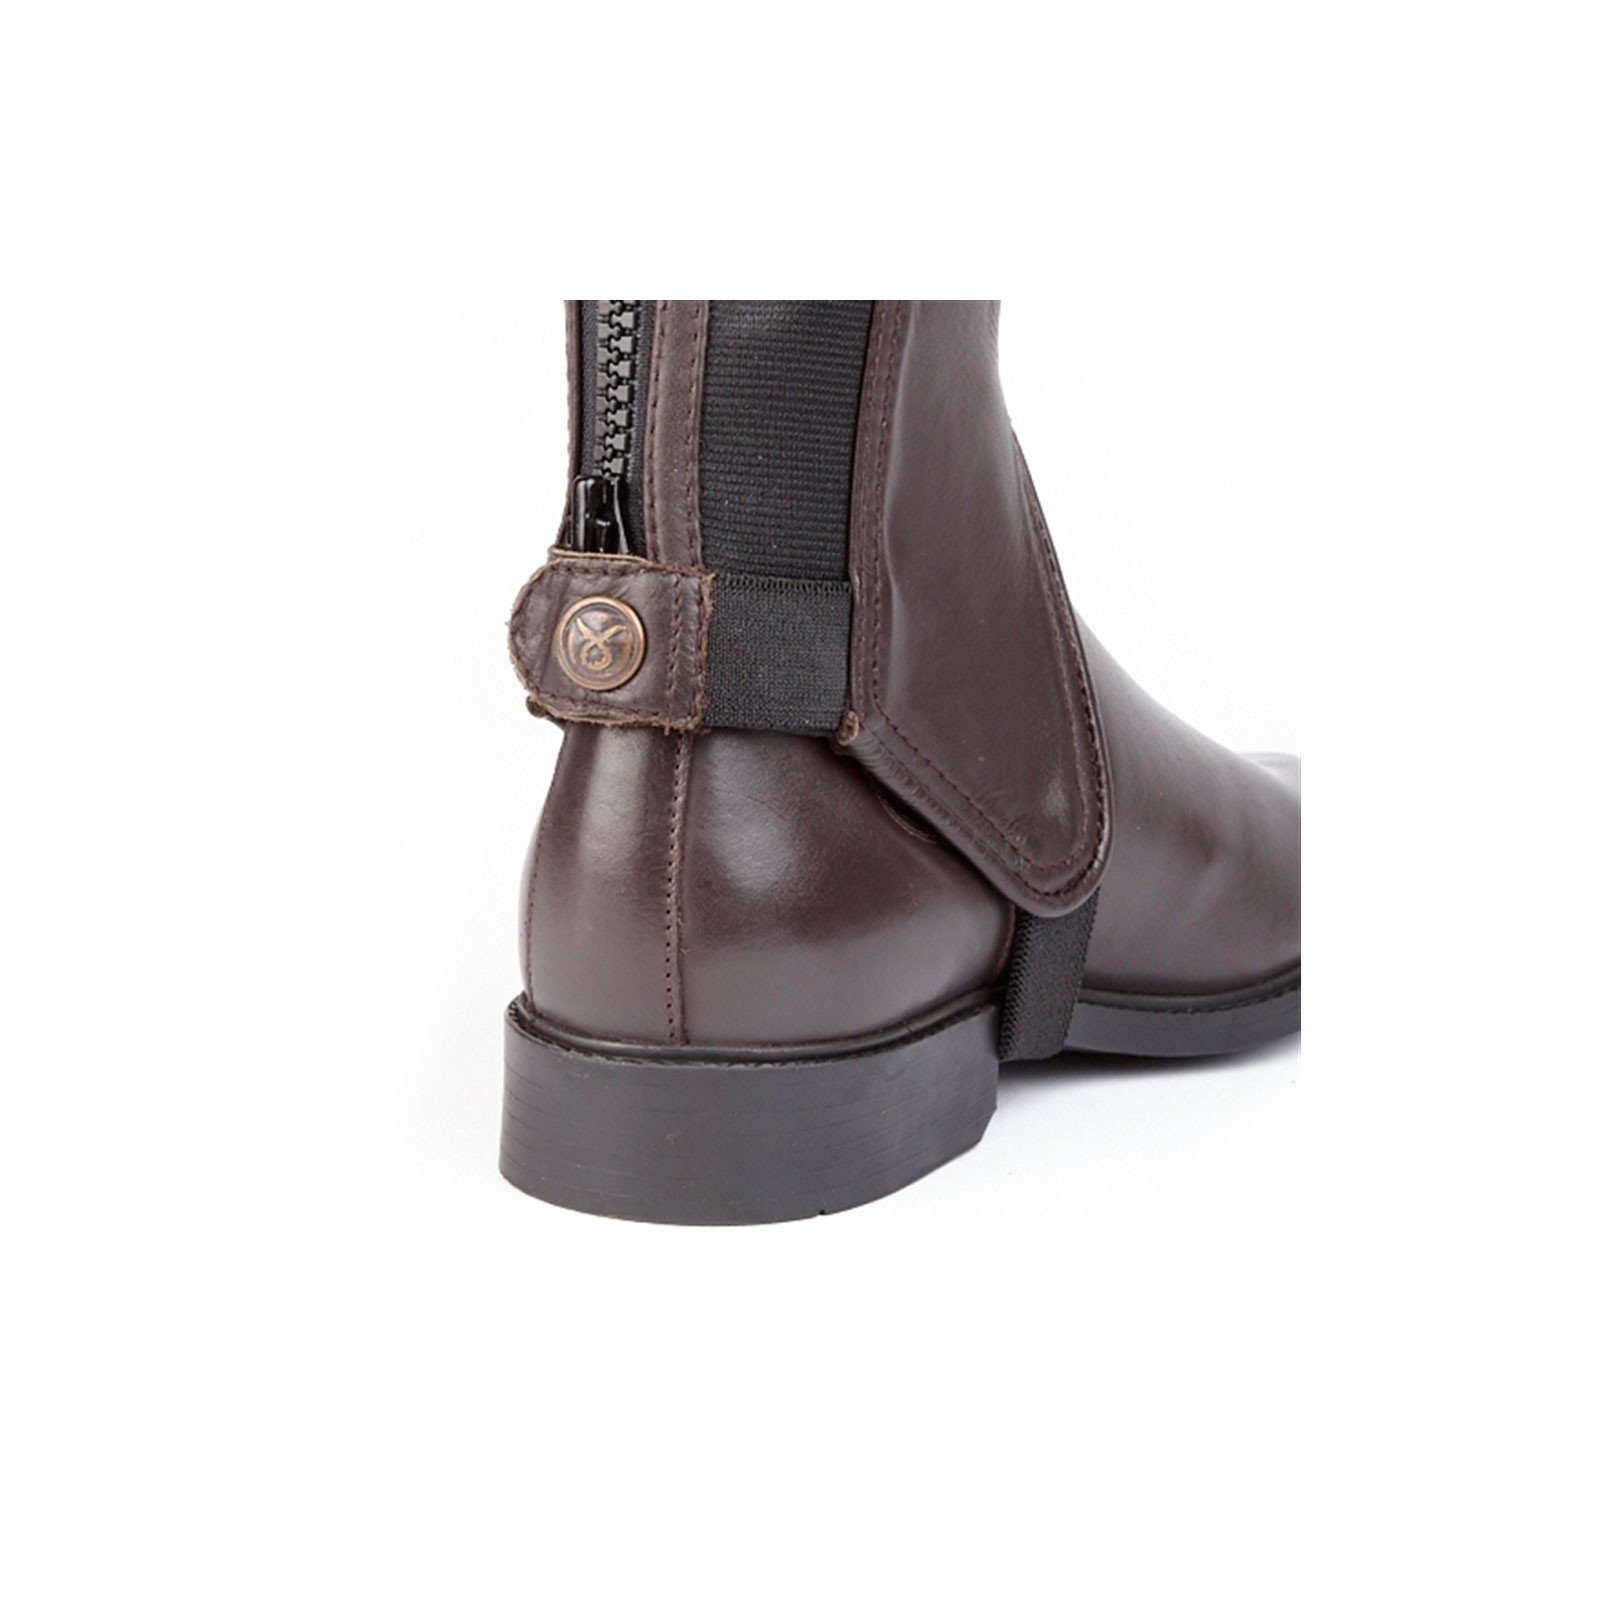 Brown leather gaiters